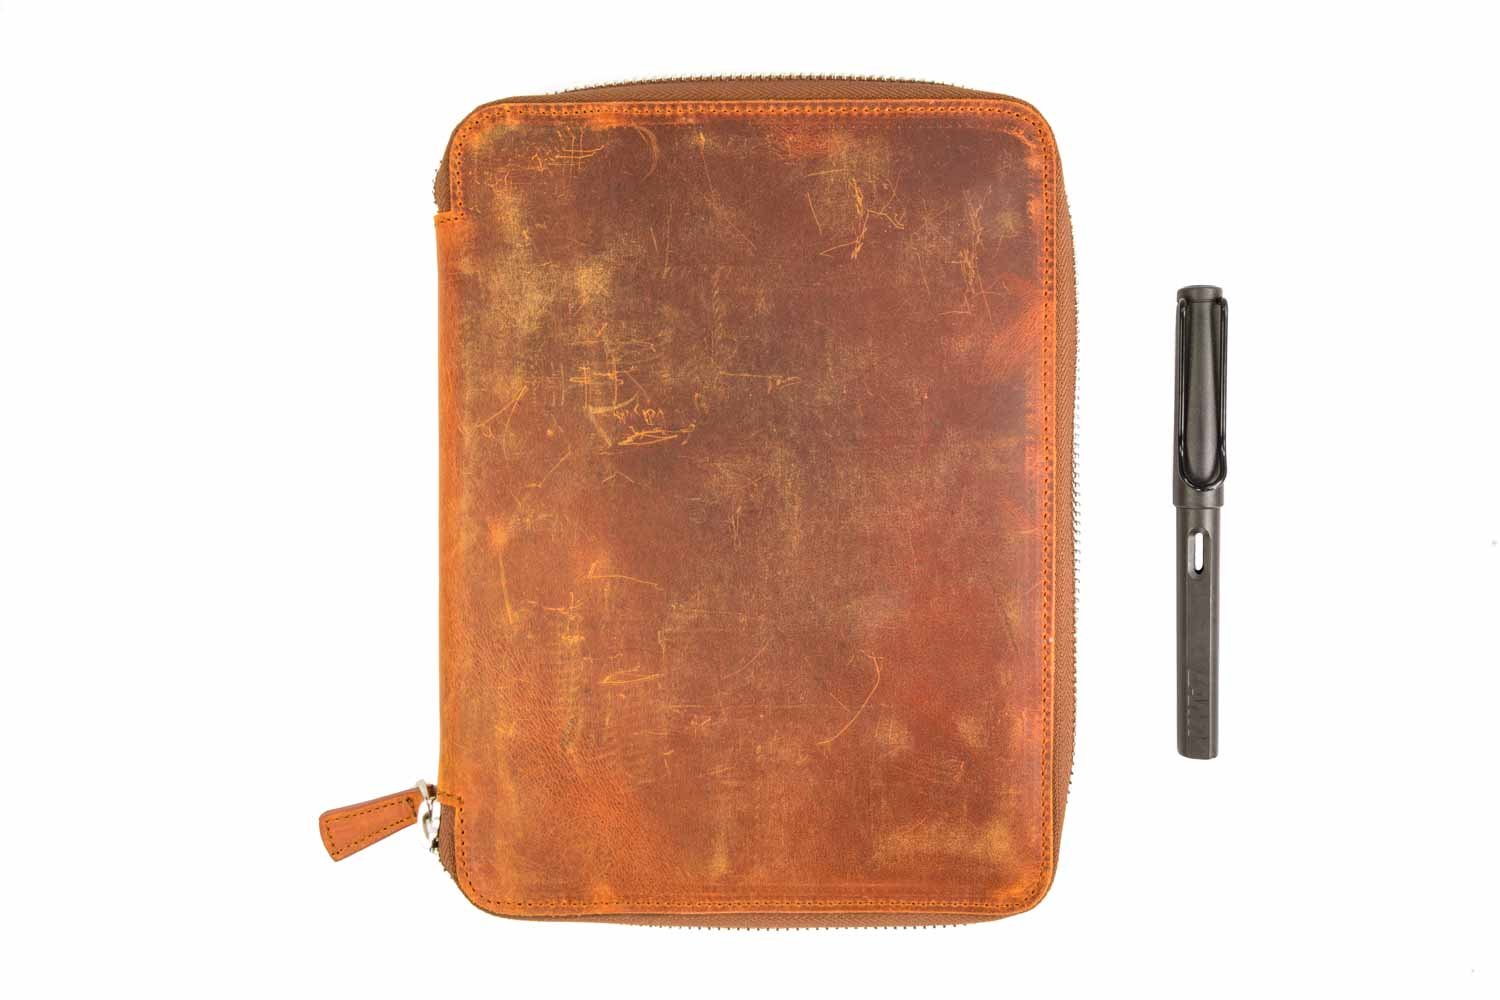 15 Unique Gifts for the Writers on Your List - Galen Leather